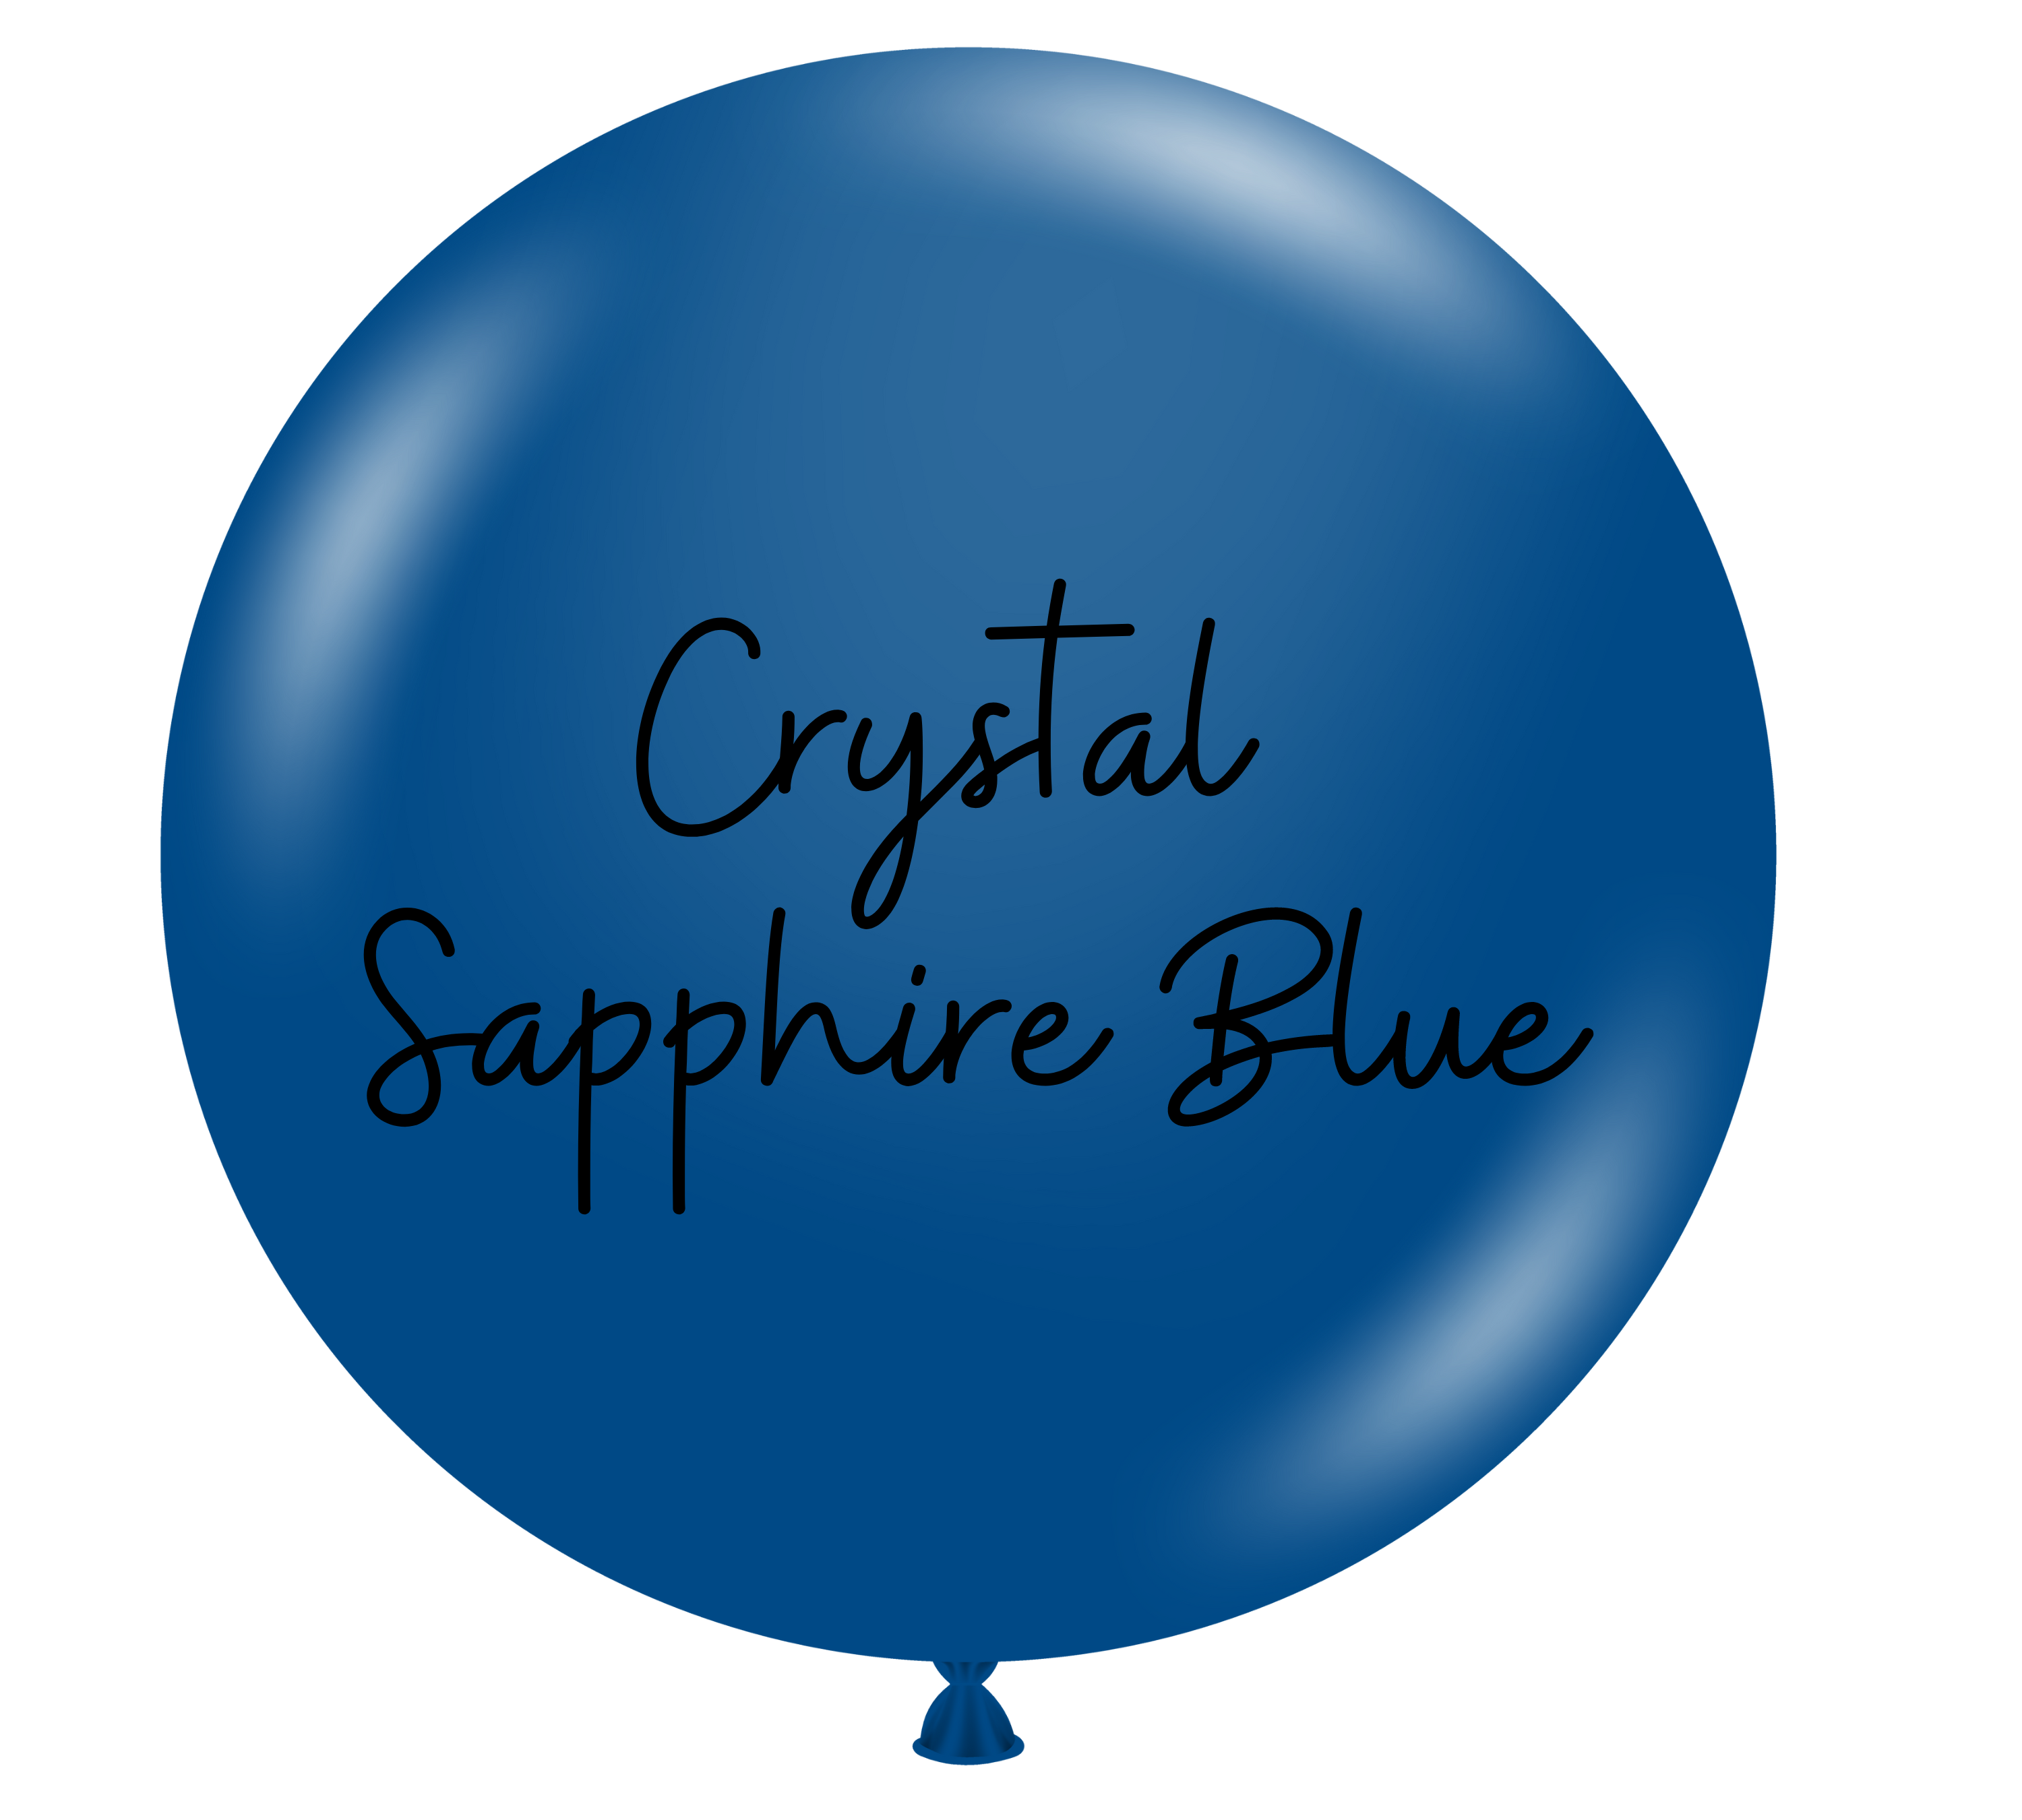 36" TUFTEX Crystal Sapphire Blue Latex Balloons (Discontinued) - 3 Foot Giant | 2 Count